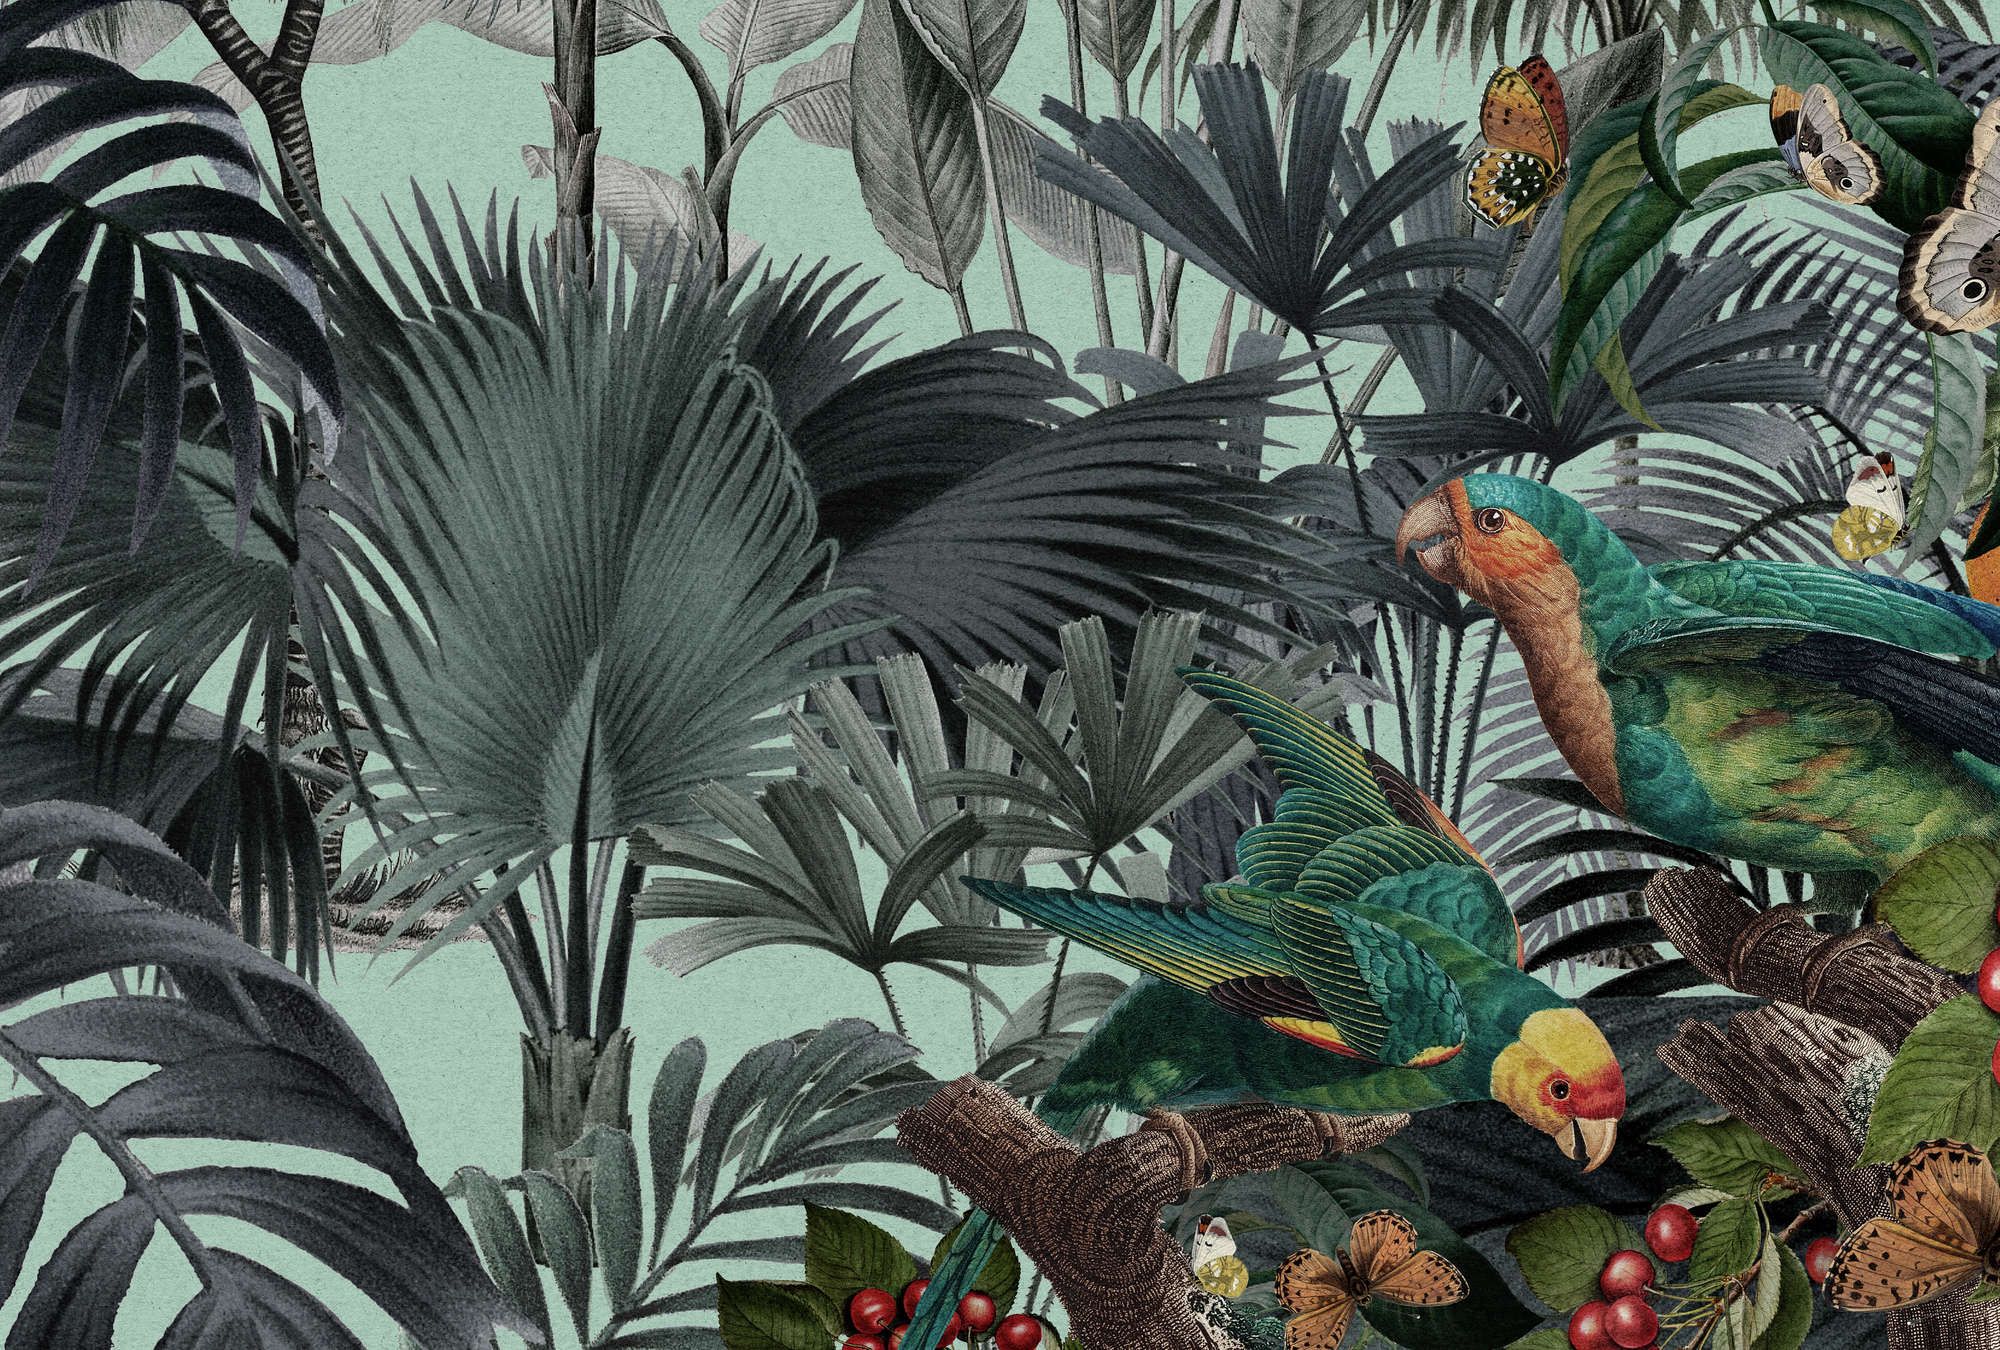             Photo wallpaper »arabella« - Jungle & parrots on kraft paper look - Smooth, slightly pearly shimmering non-woven fabric
        